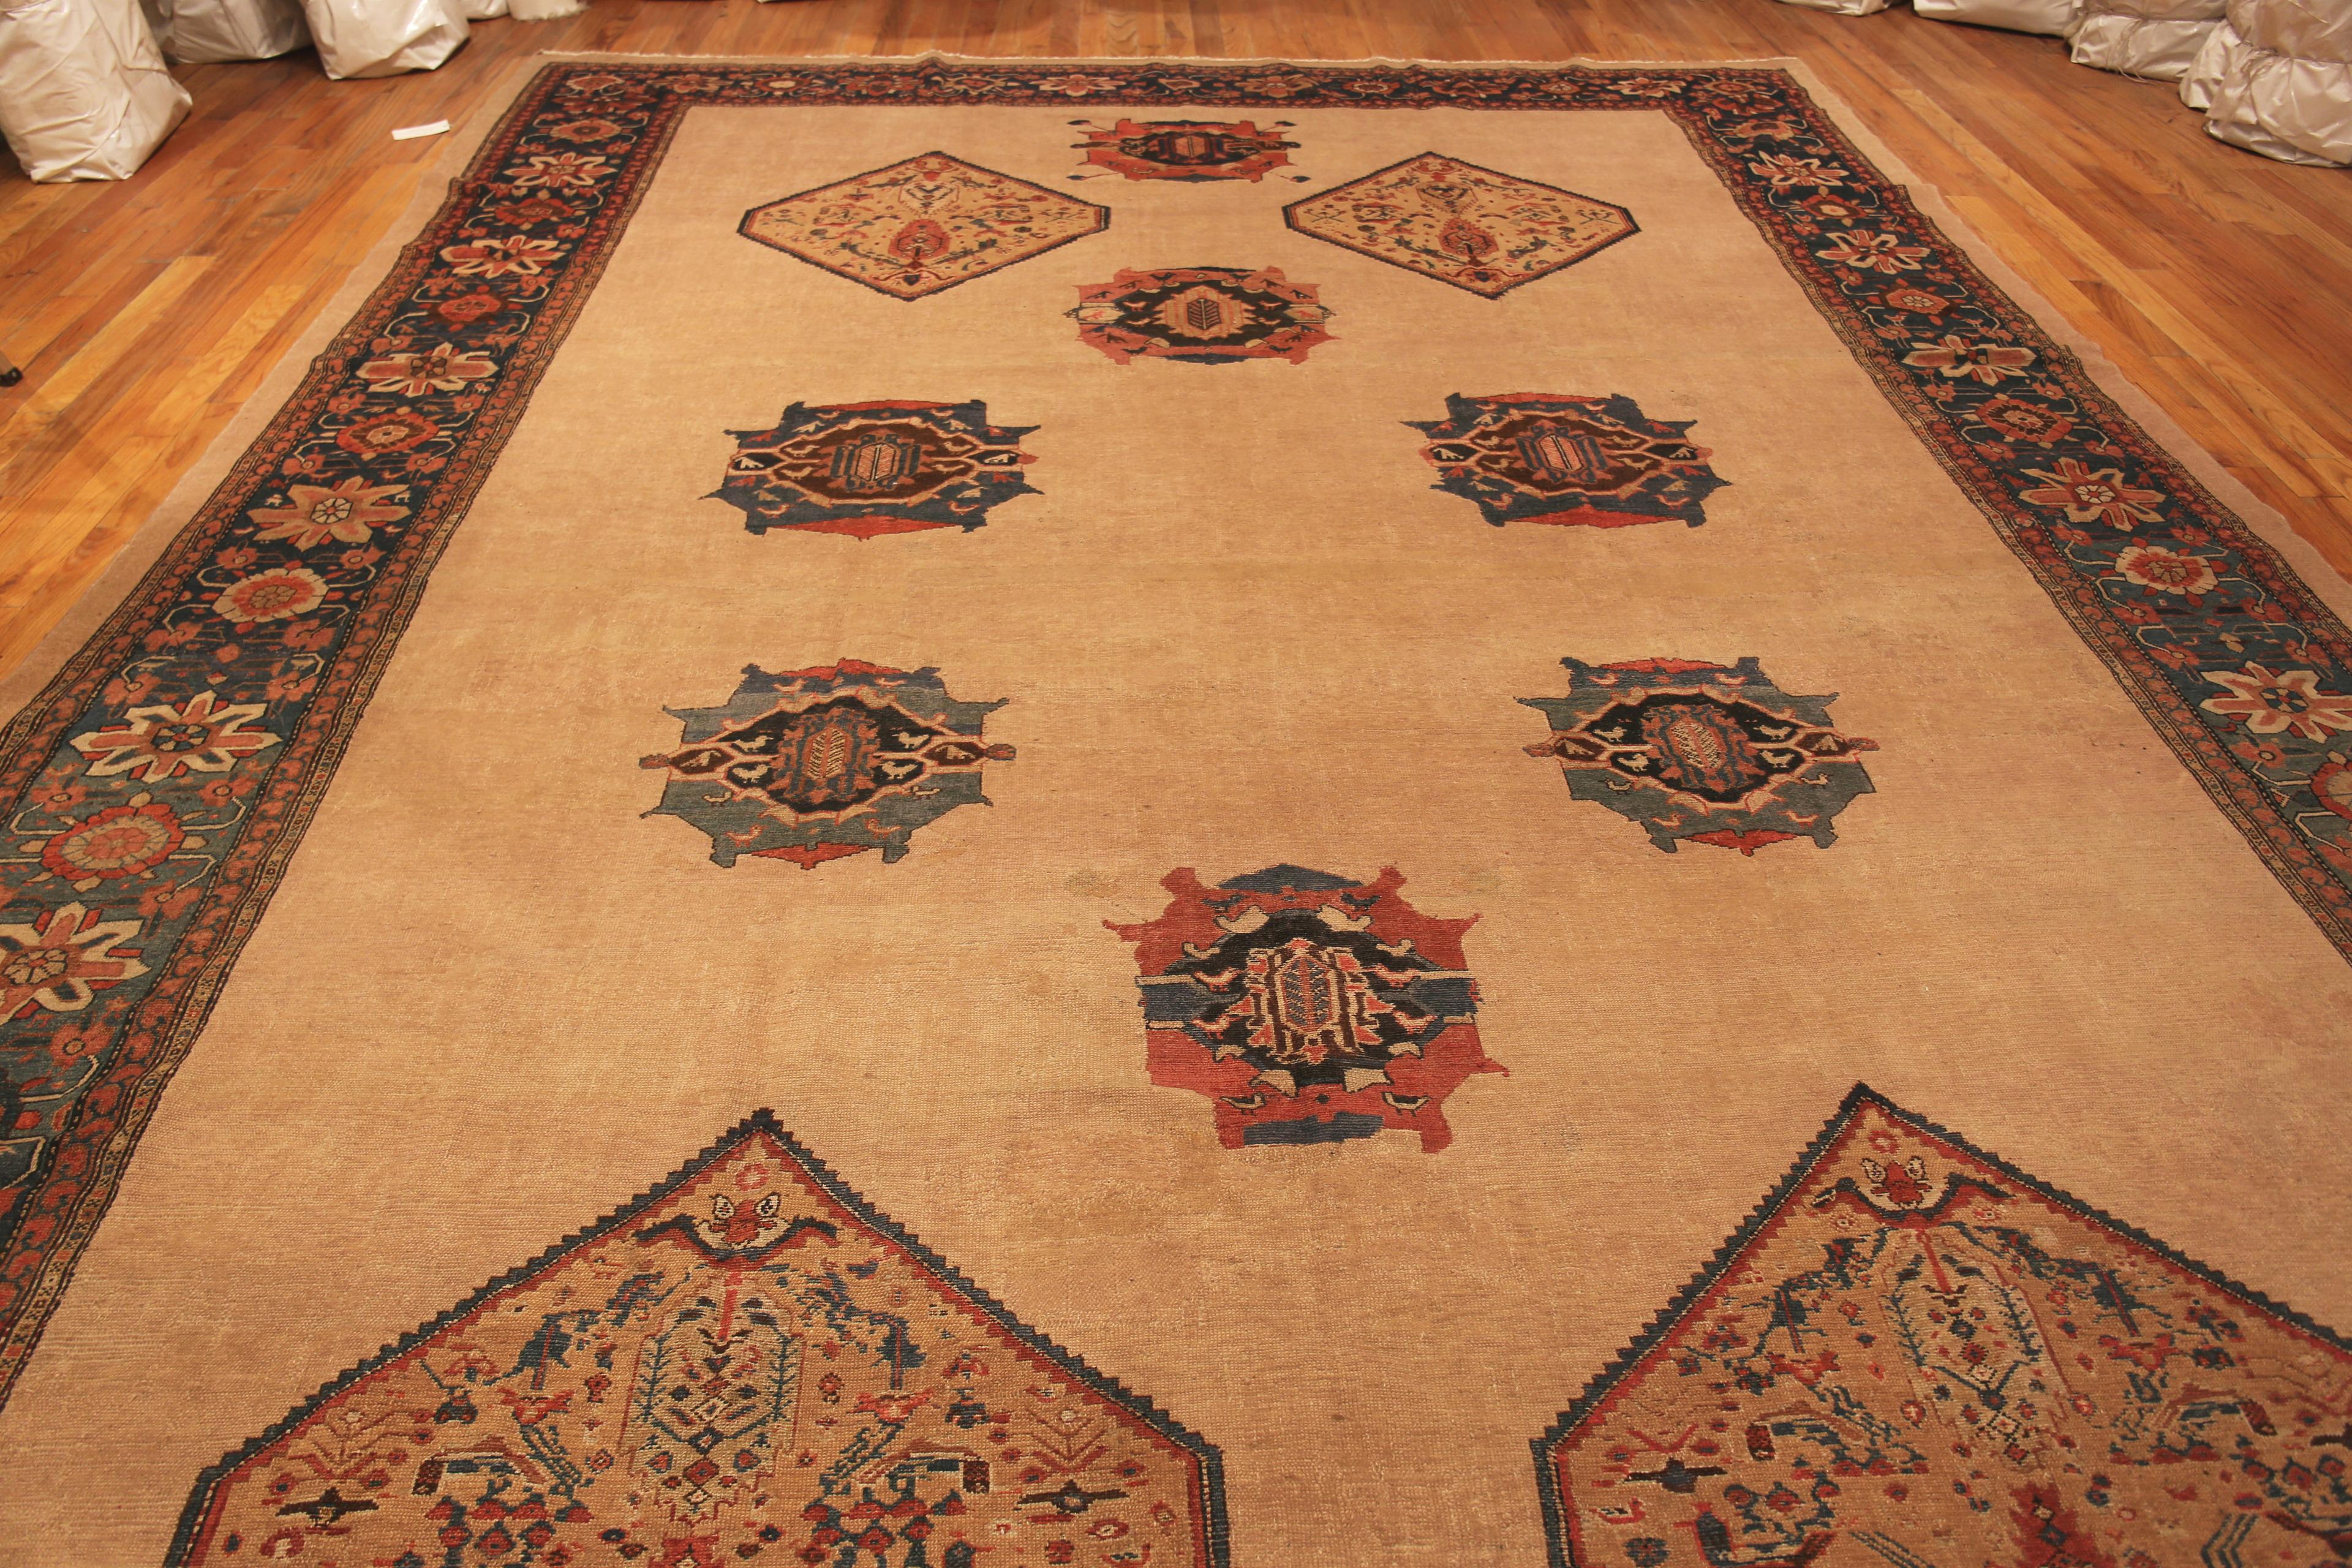 Large Antique Persian Serab Rug, Country of Origin: Persian rug, Circa date: 1900. Size: 11 ft 8 in x 17 ft 7 in (3.56 m x 5.36 m)

